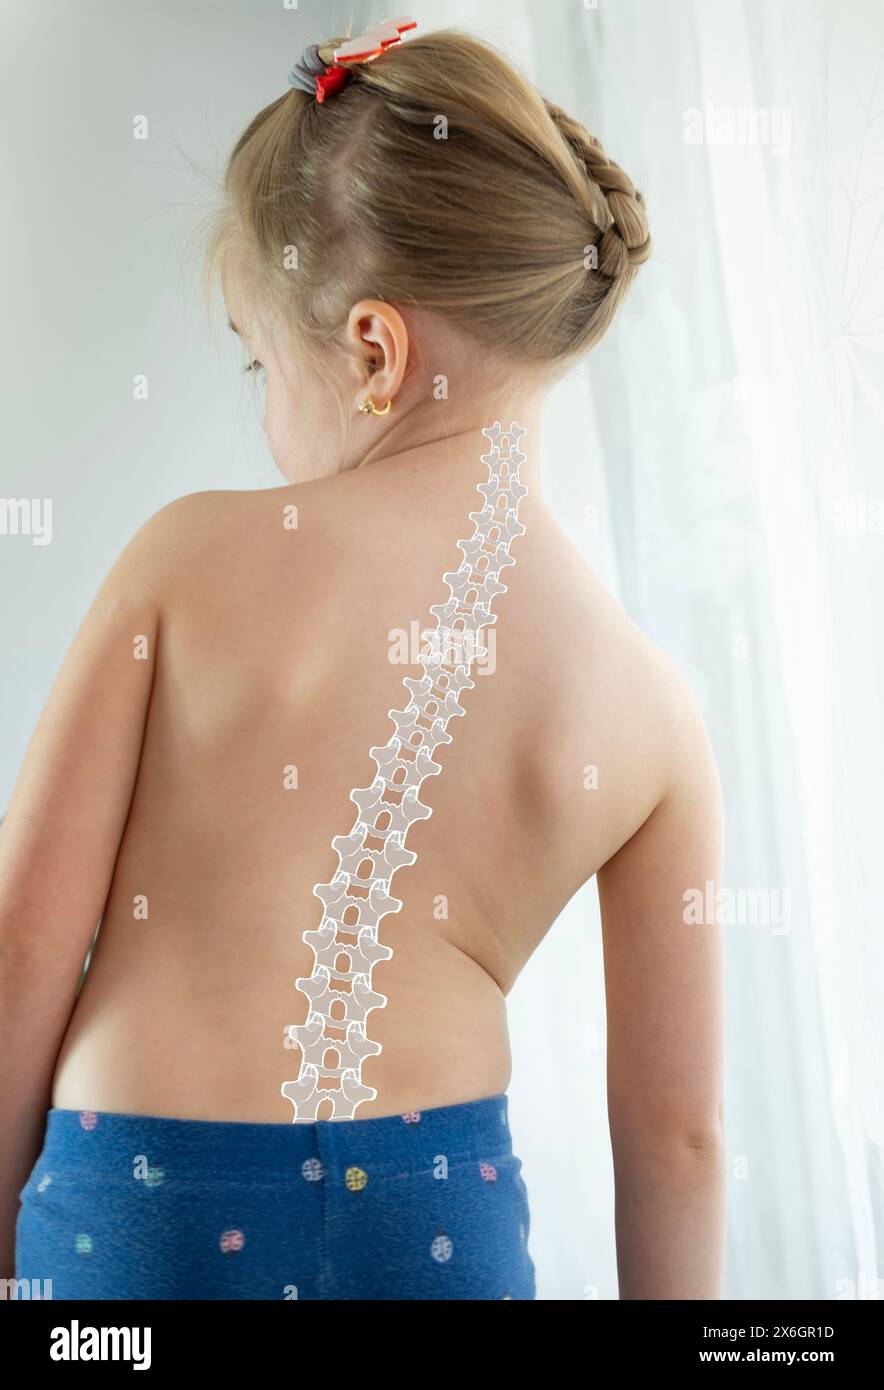 back little girl with scoliosis, child 5 years old crookedly standing, spine deformity curved, orthopedic condition, need for medical attention Stock Photo